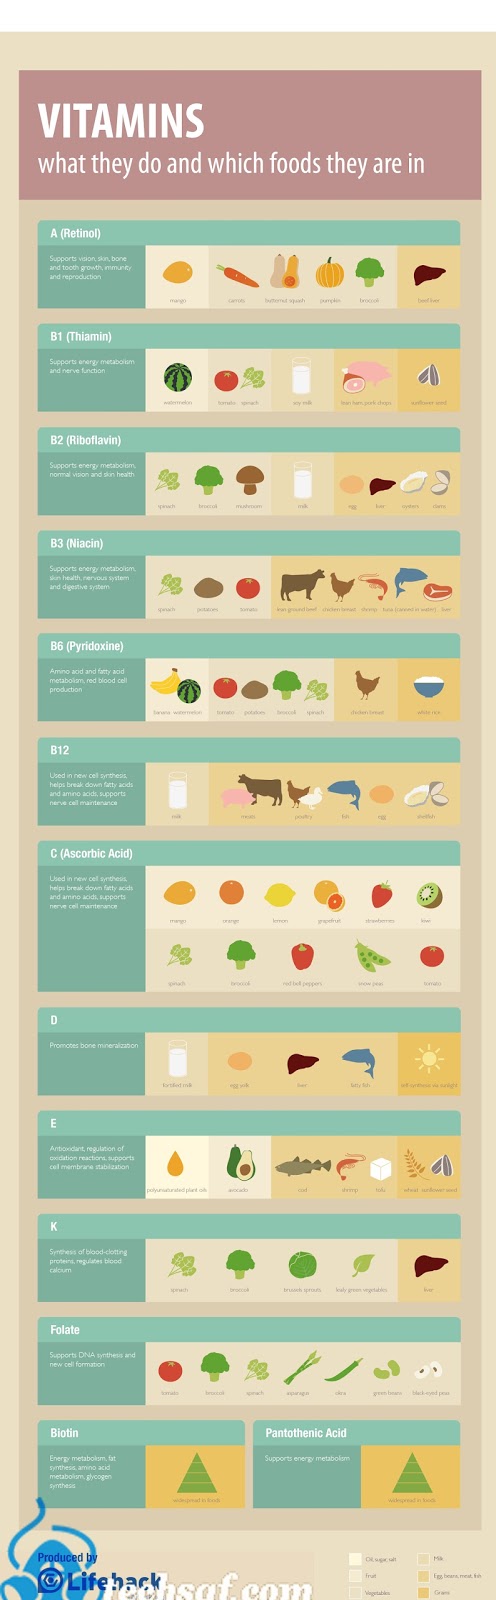 Vitamins Cheat Sheet: What They Do and Good Food Sources [Infographic ...